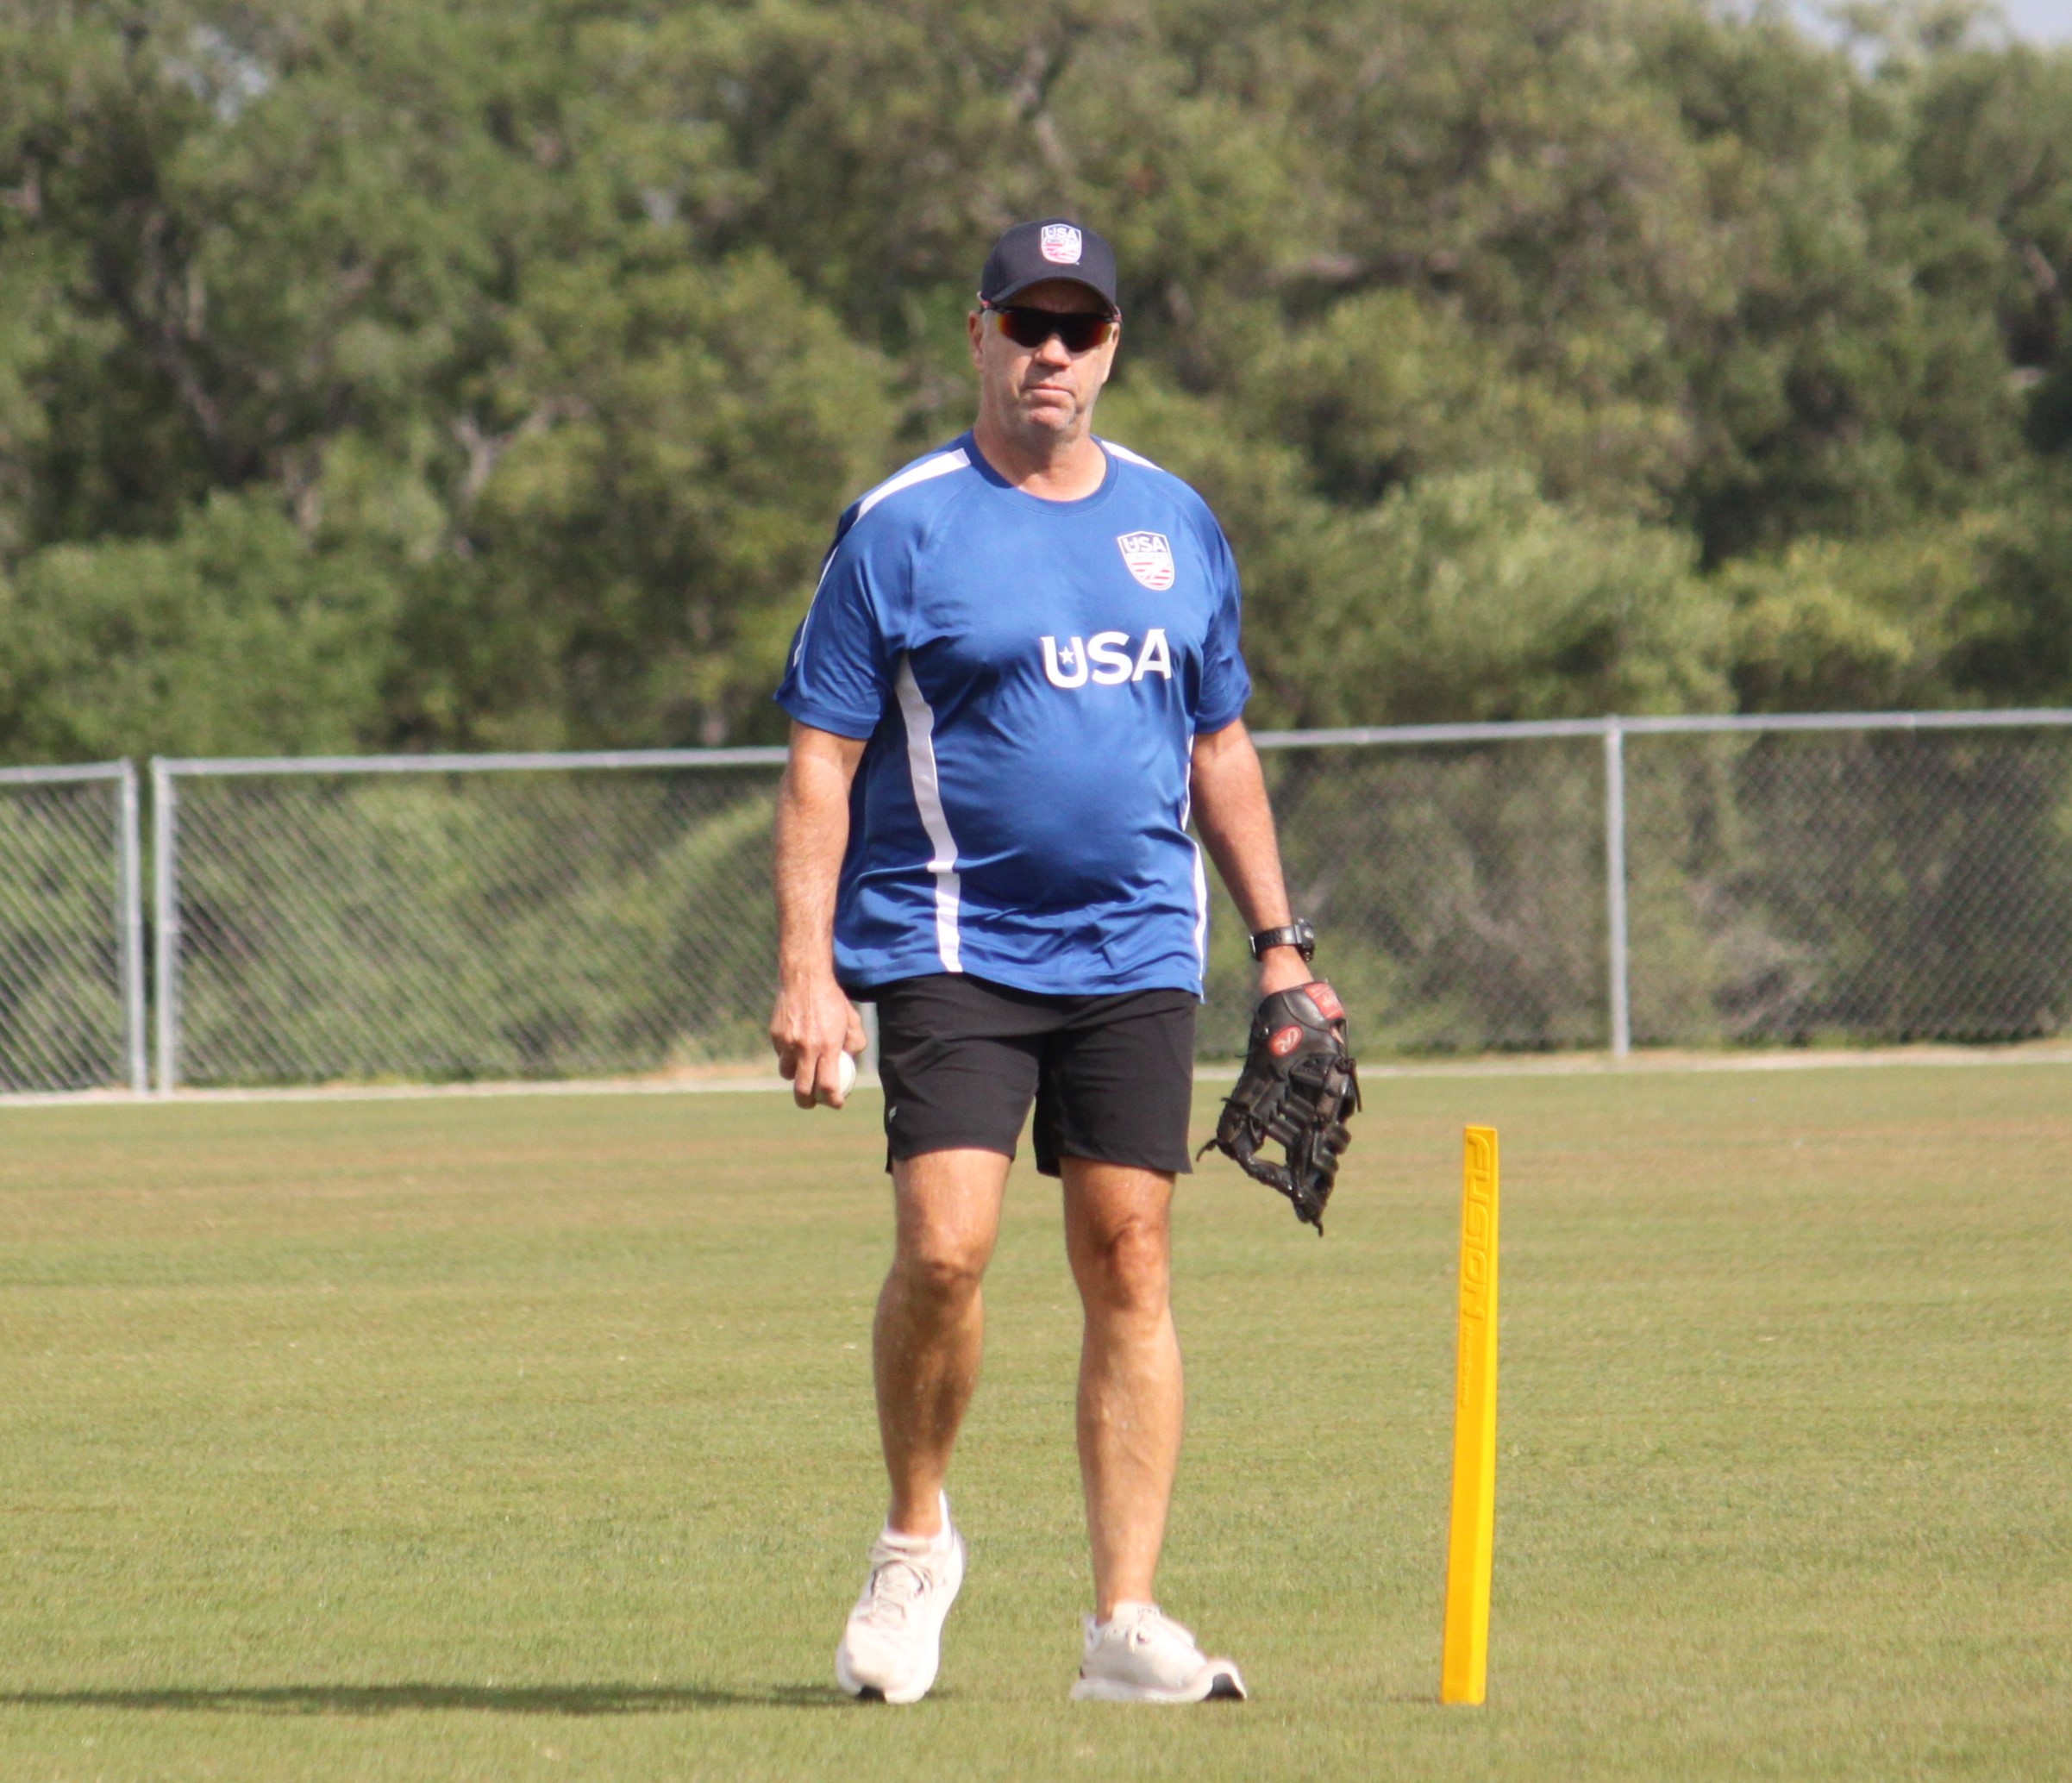 Stuart Law Appointed Head Coach of USA Men’s Cricket Team